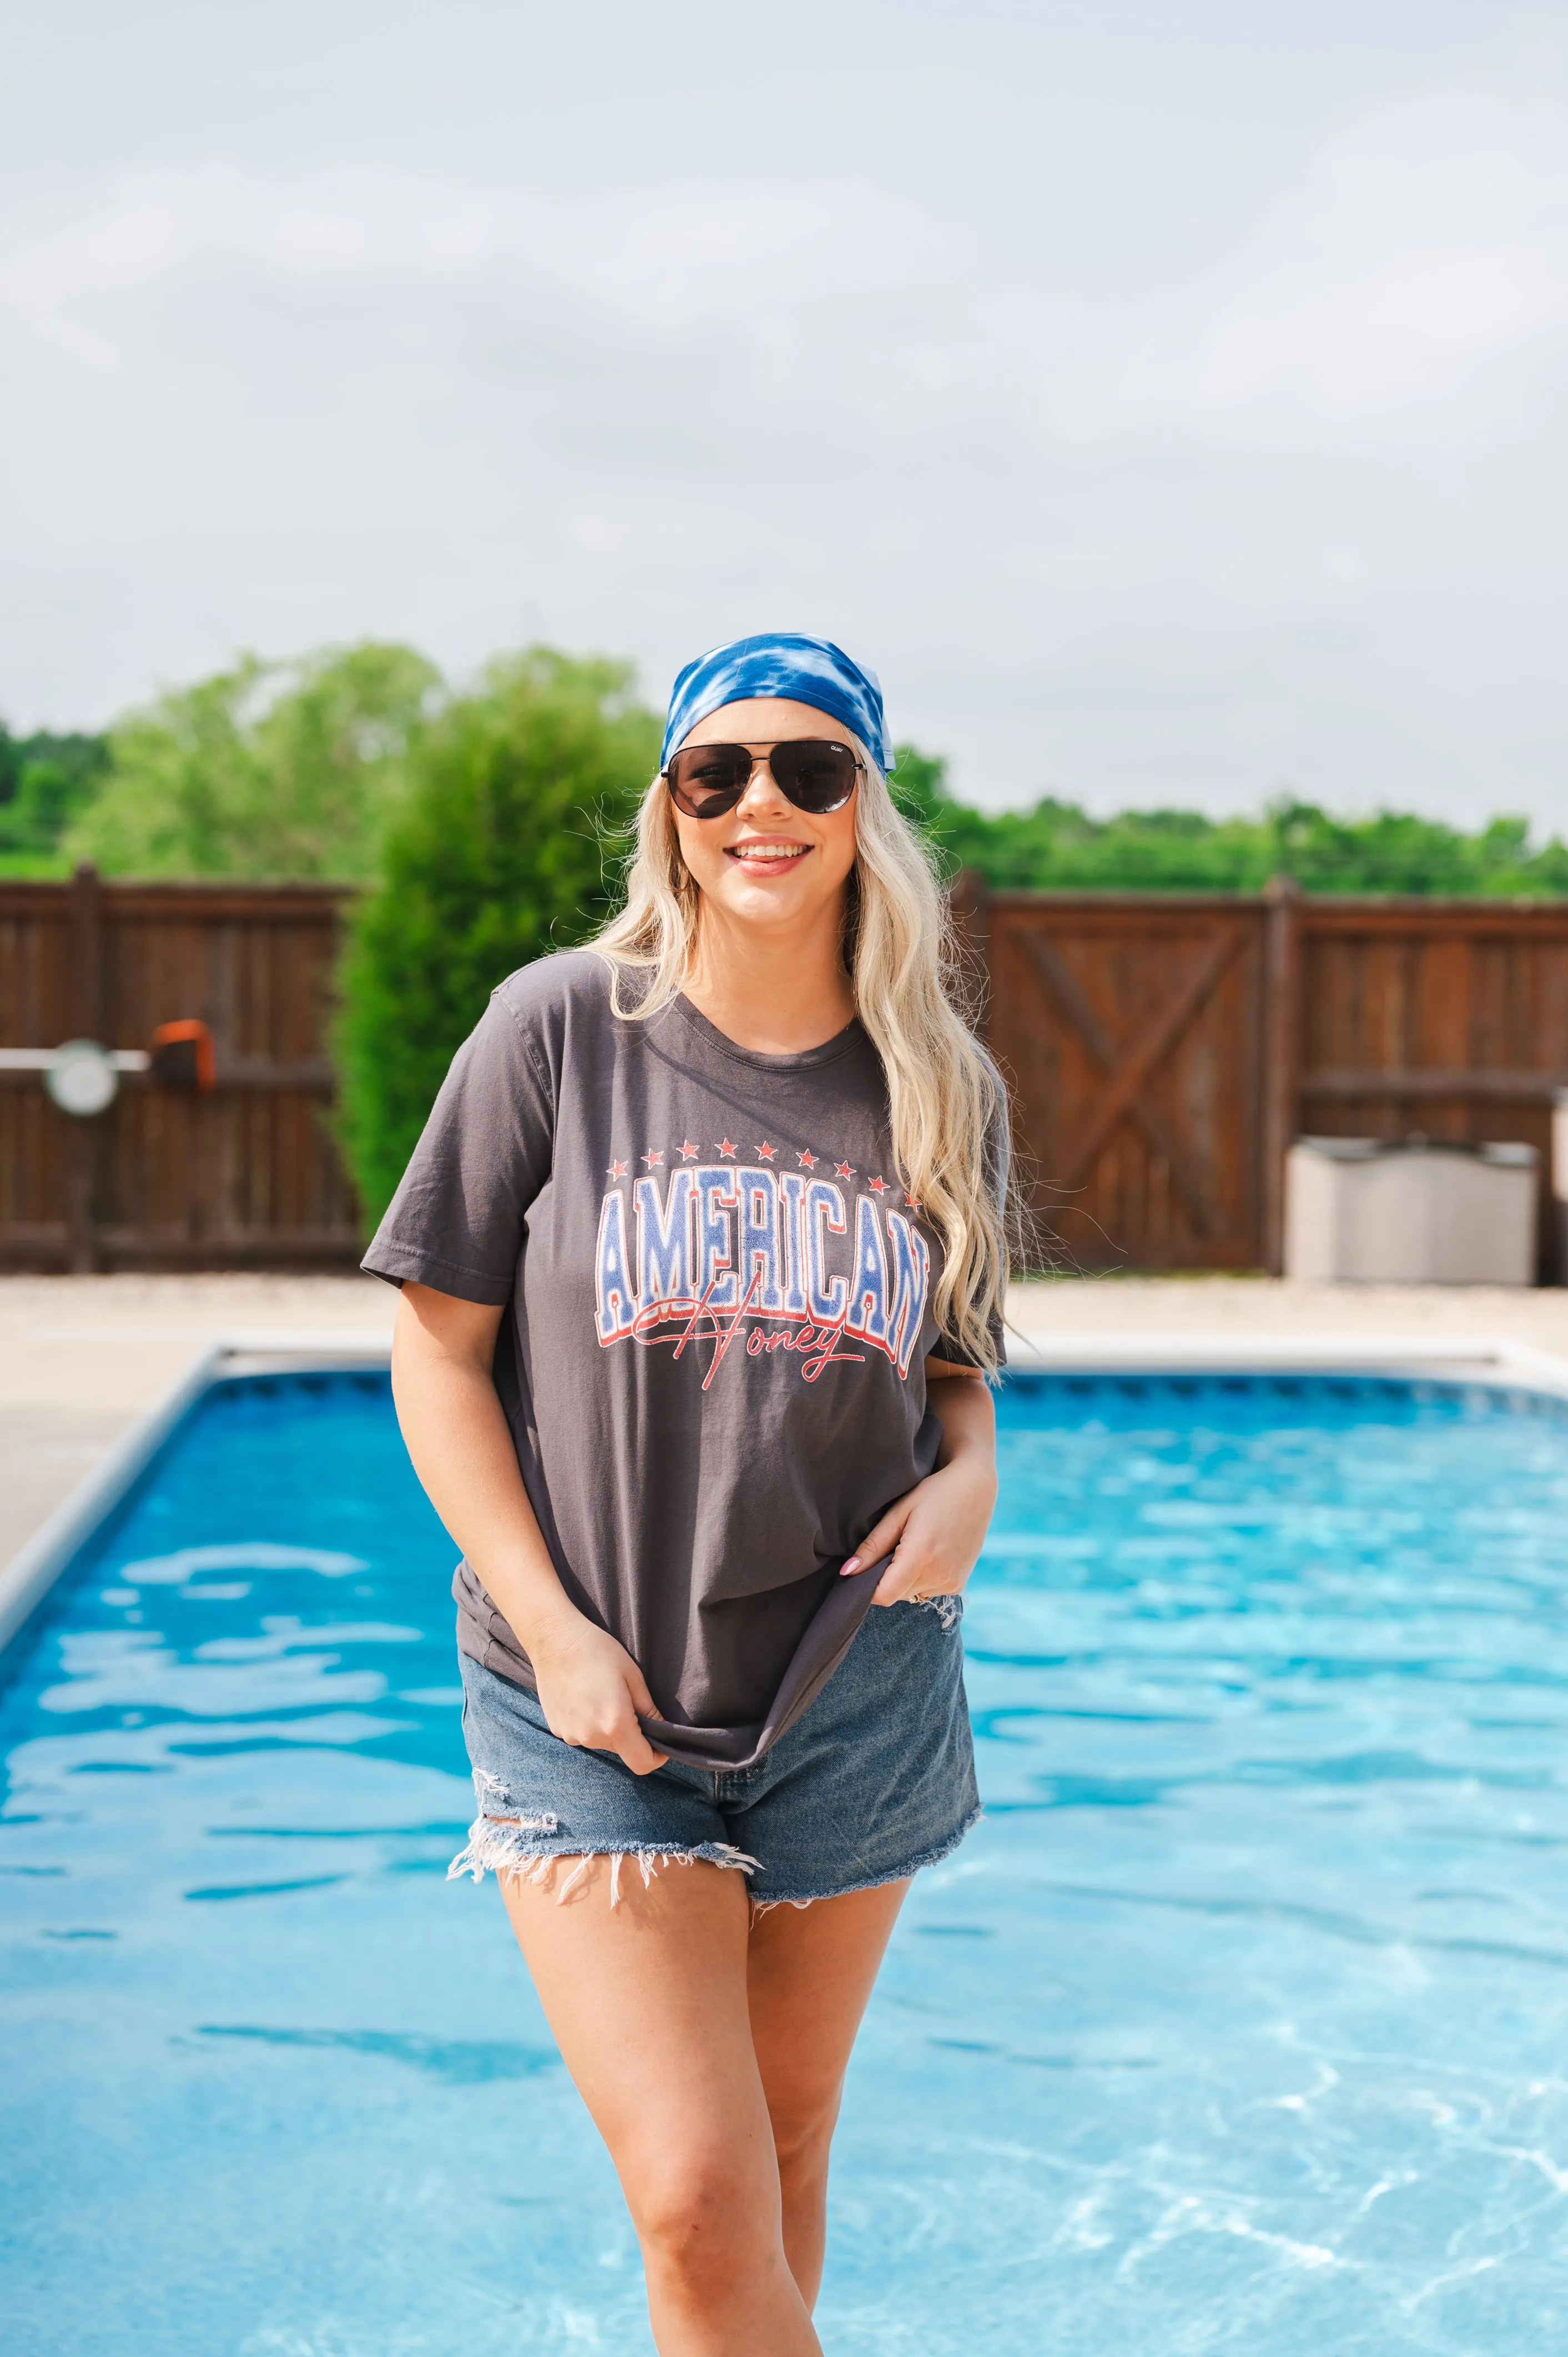 Woman in a casual t-shirt and denim shorts standing by a swimming pool, wearing sunglasses and a blue bandana on her head.